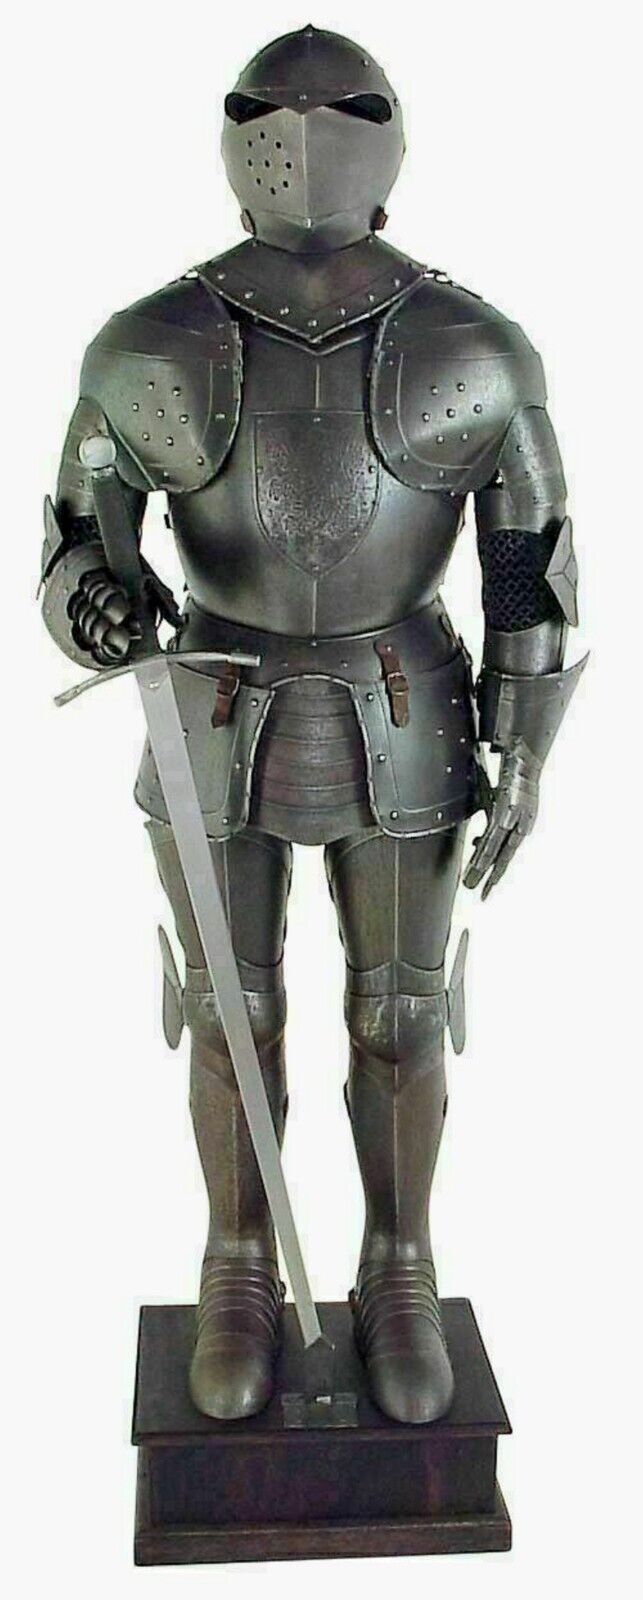 Medieval Antique Wearable Armour Knight Suit Of Armor Combat Full Body Costume